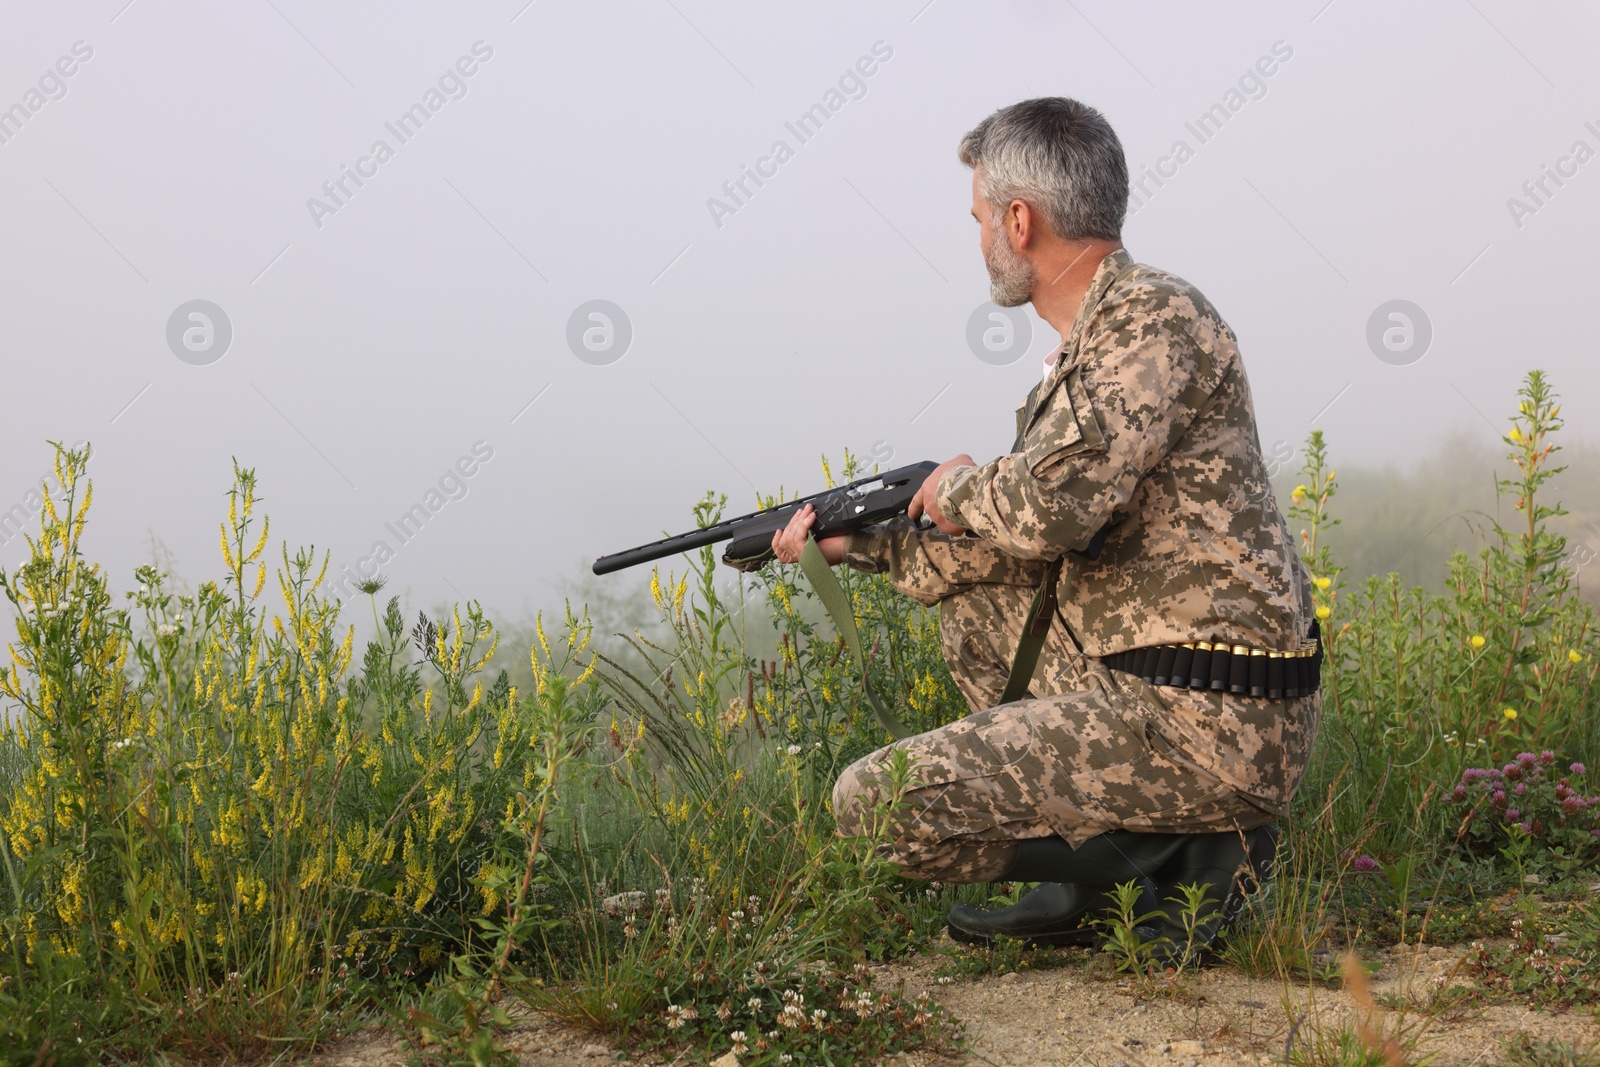 Photo of Man wearing camouflage with hunting rifle outdoors. Space for text